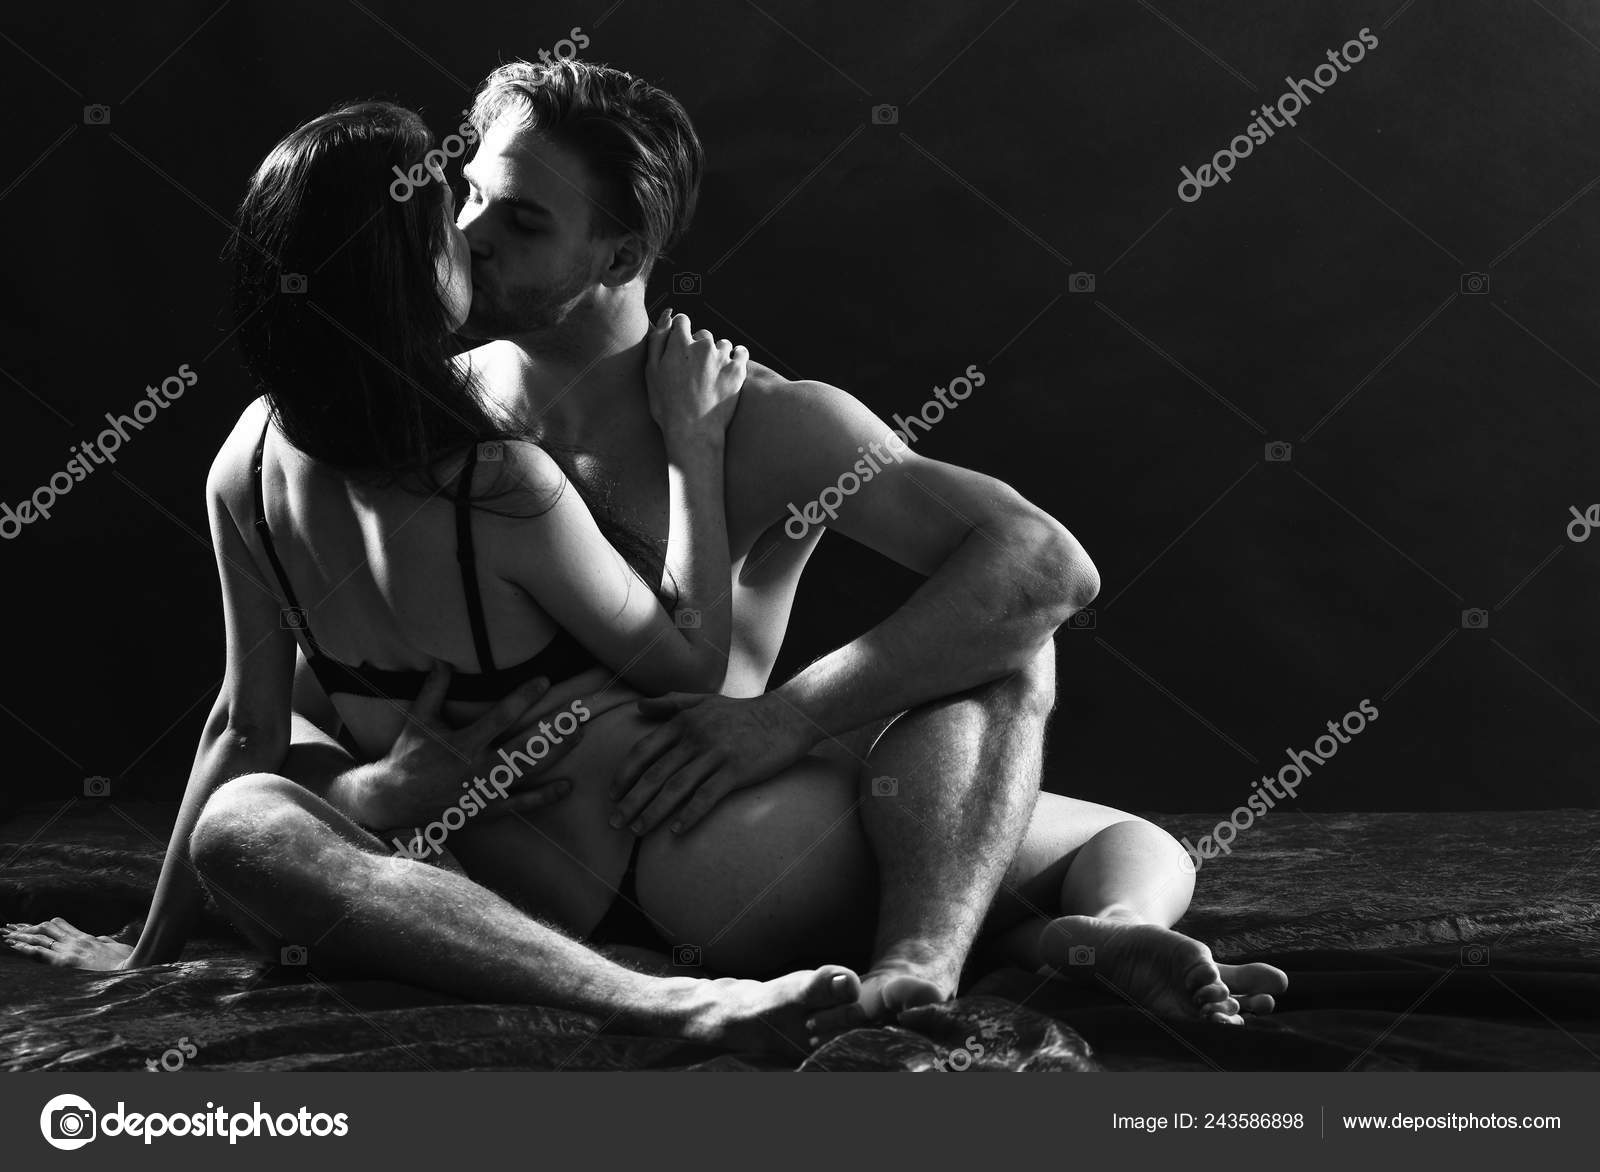 Couple lovers in lingerie make love have sex. Passionate sexual foreplay image